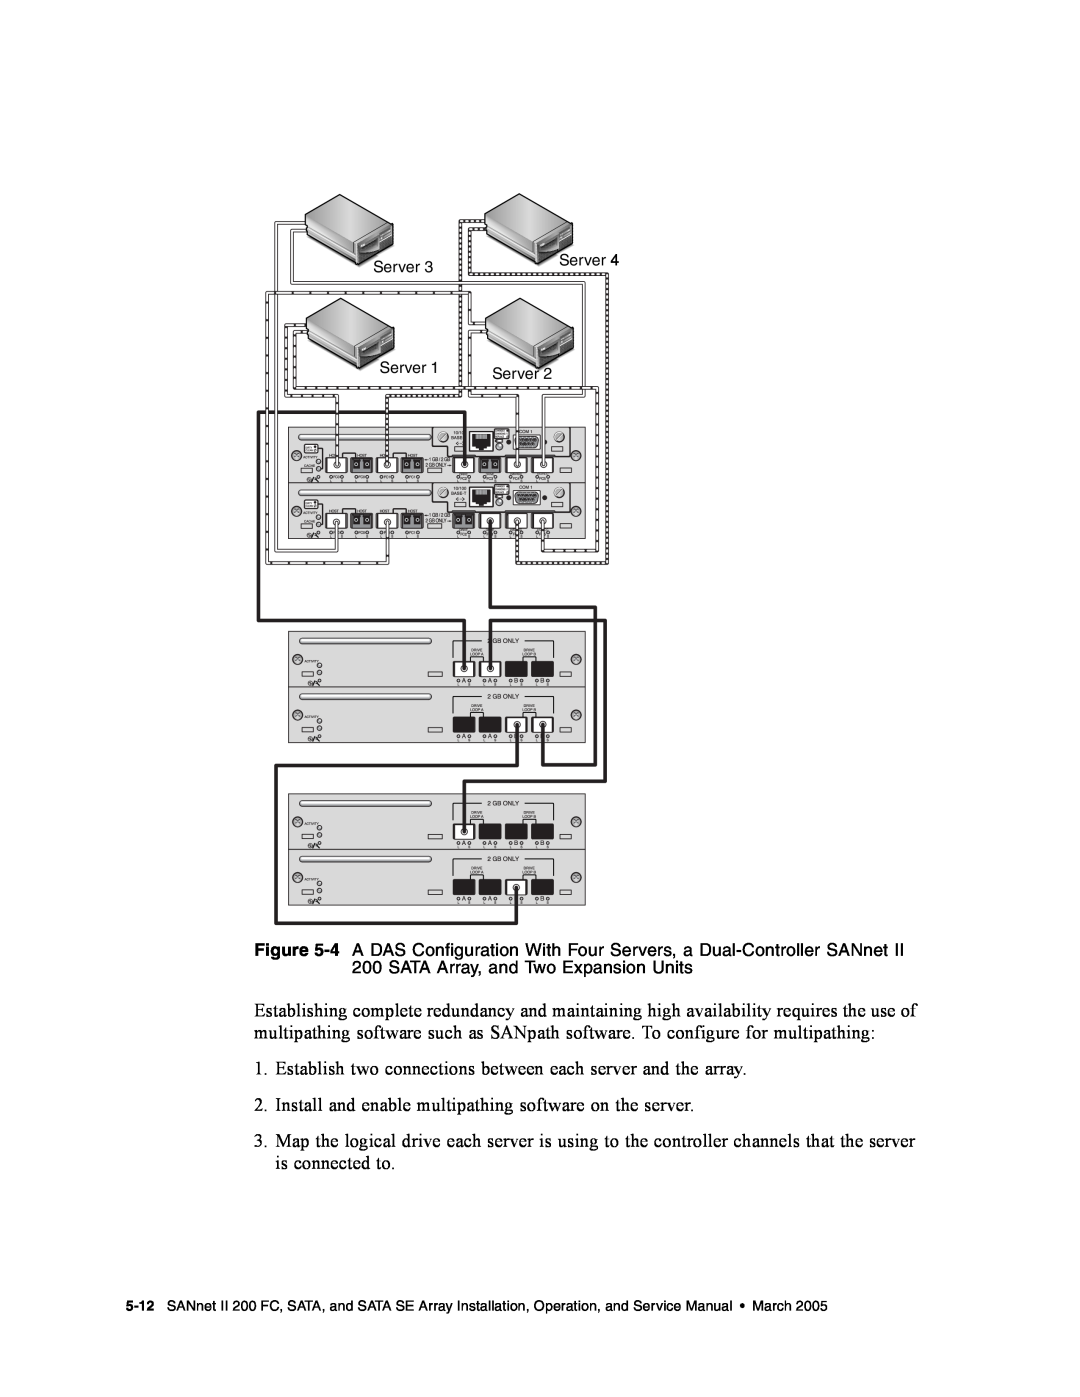 Dot Hill Systems II 200 FC service manual Establish two connections between each server and the array 